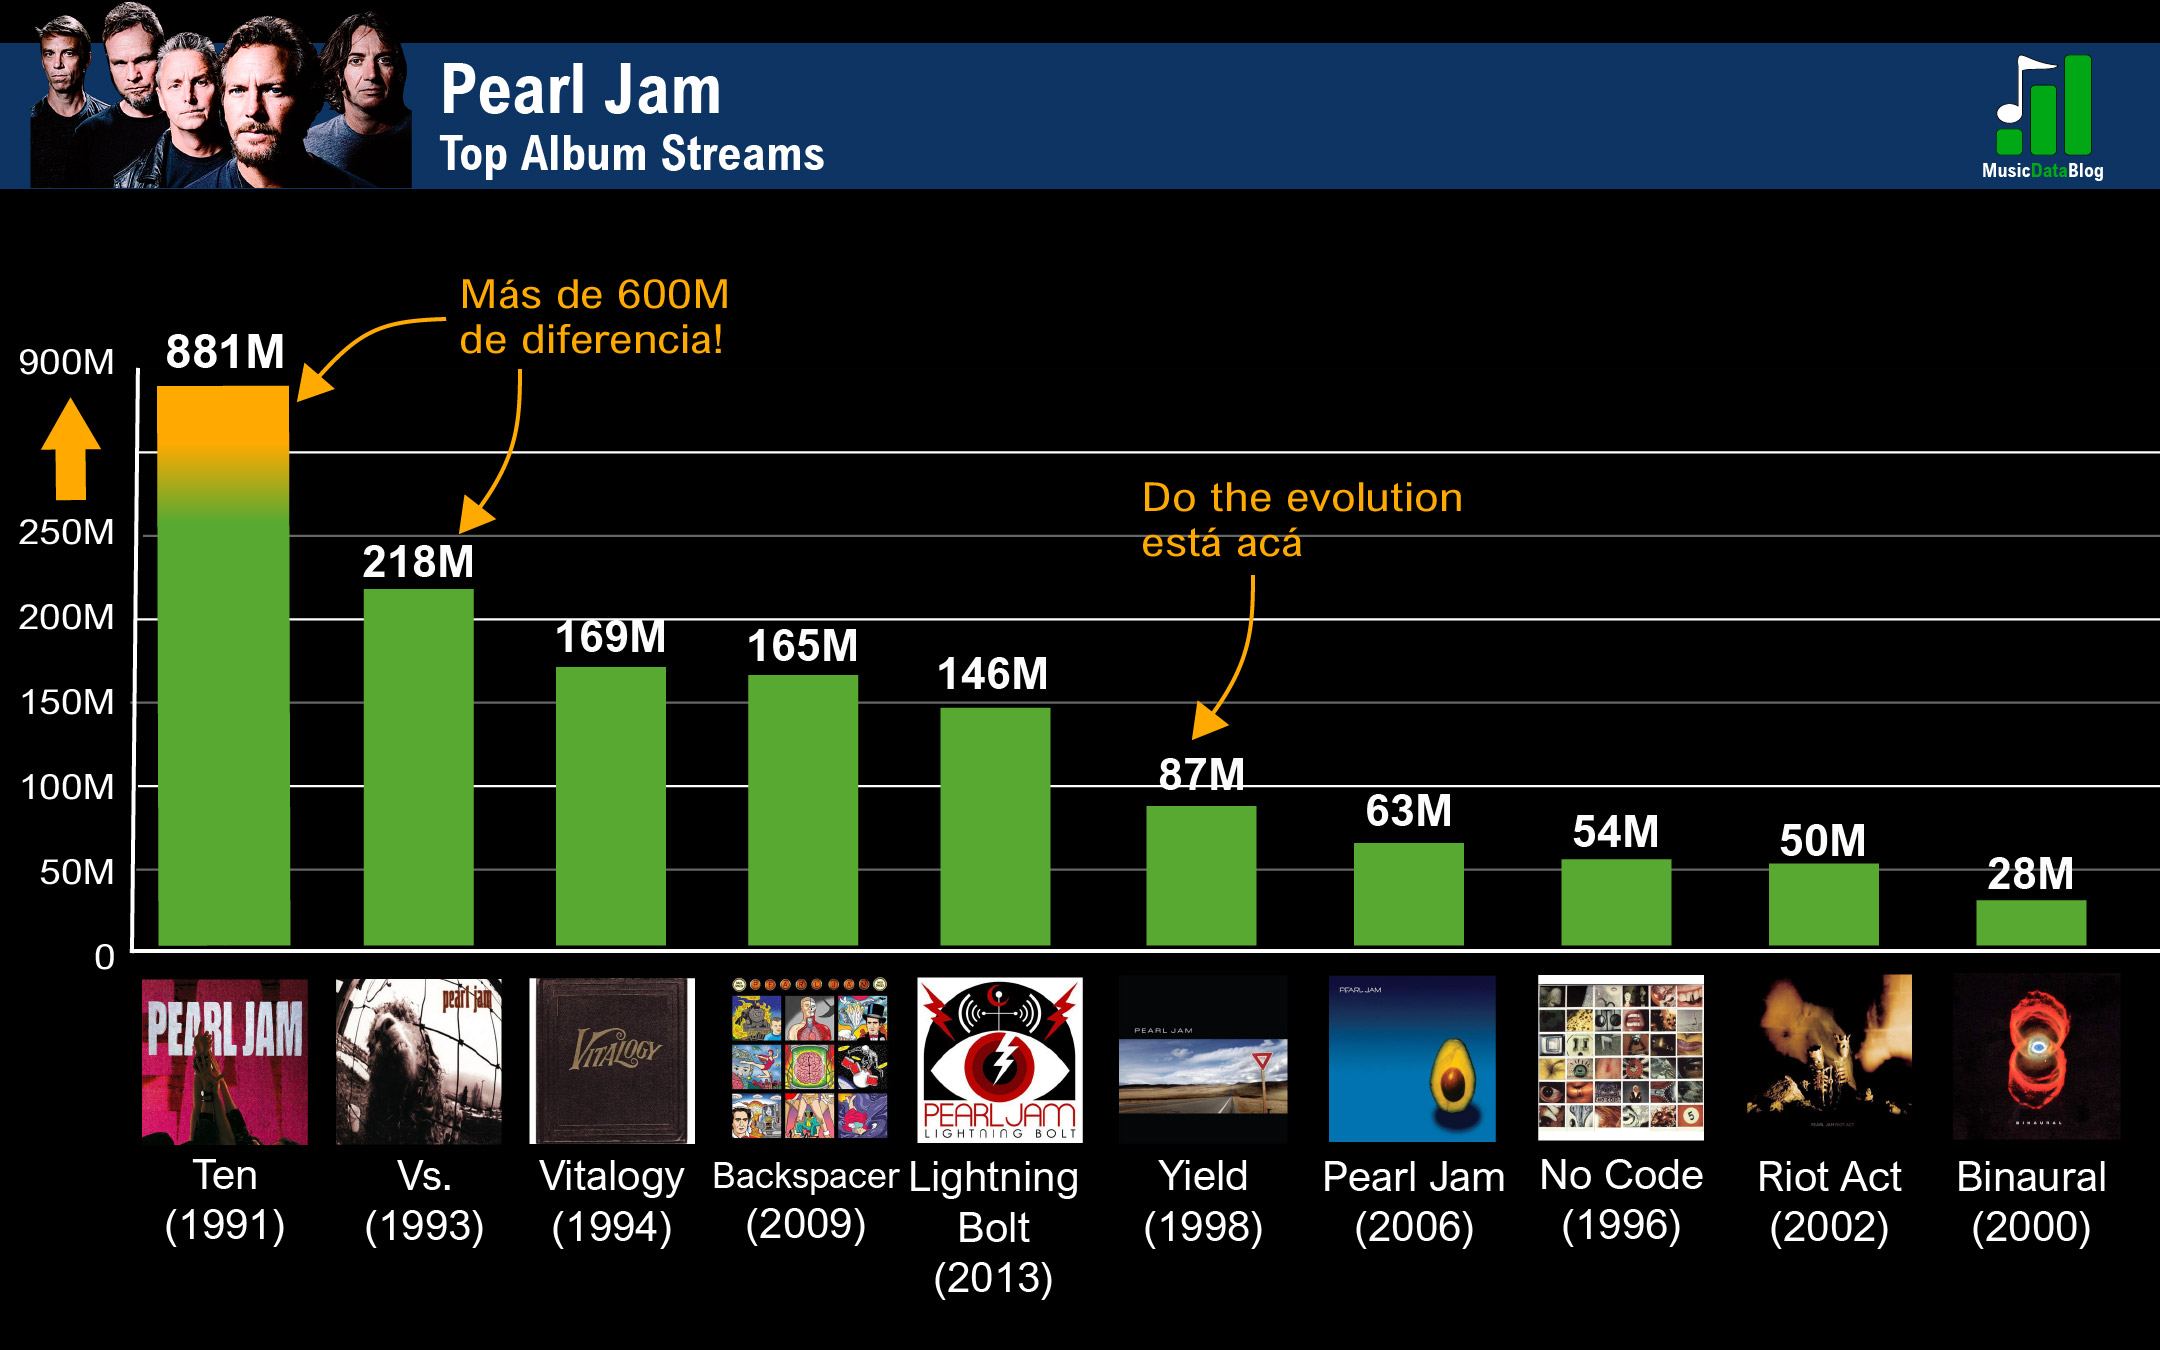 pearl jam discography ranked best works albums